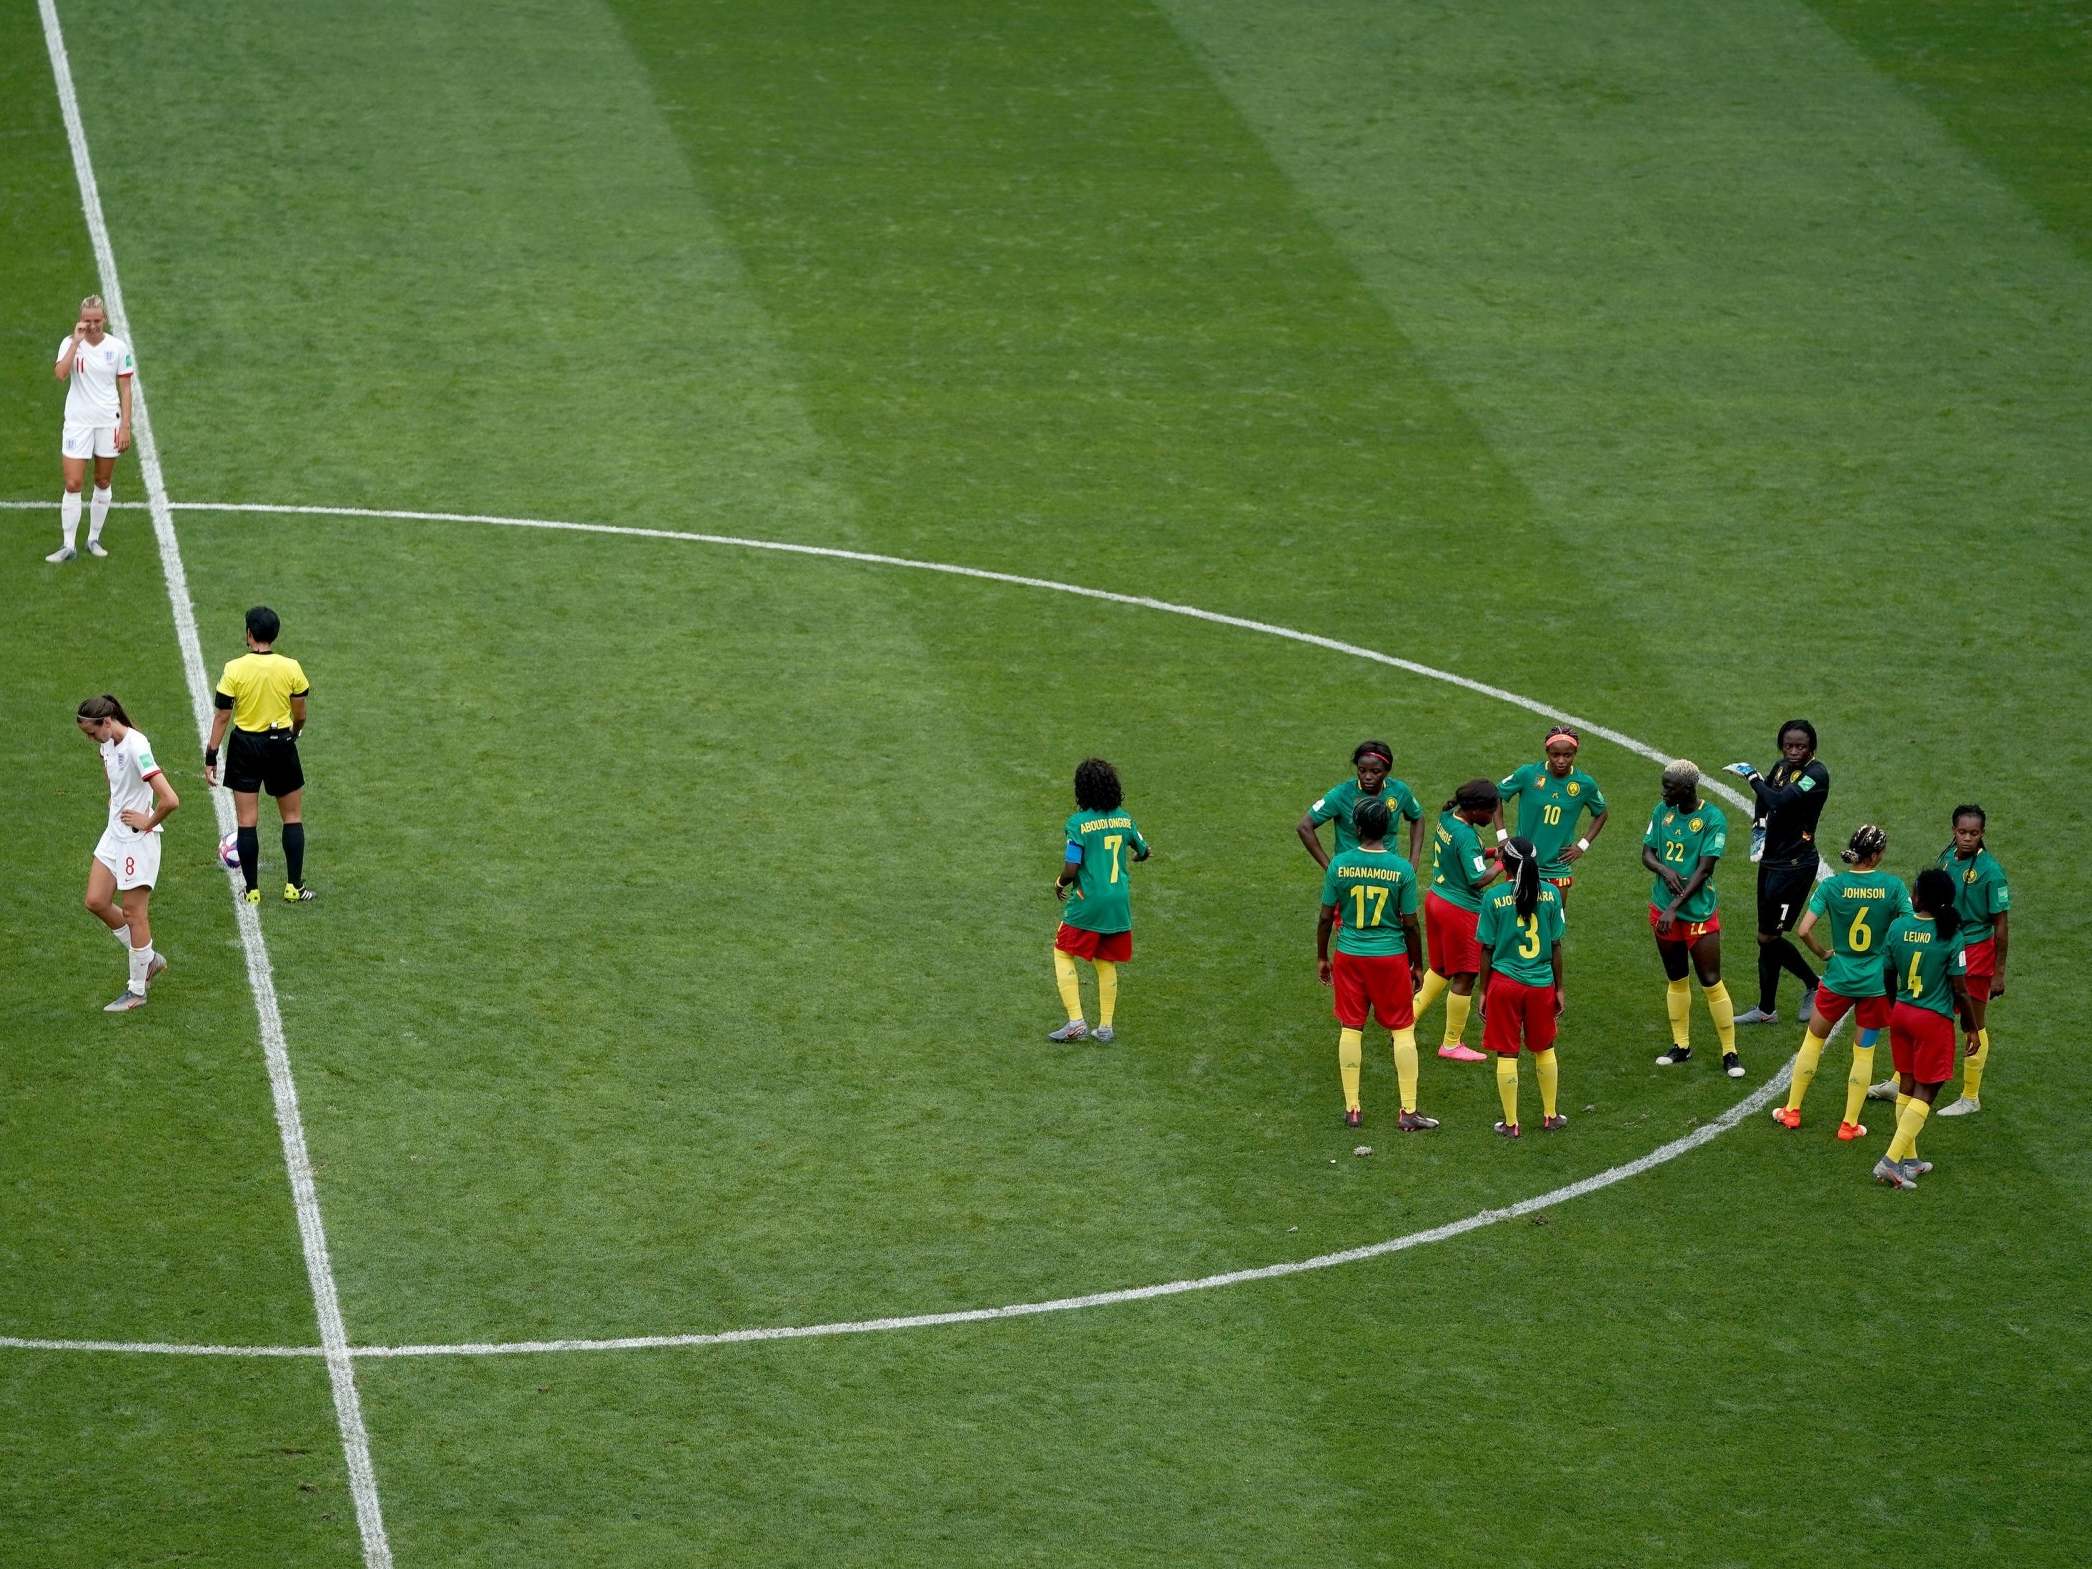 The Cameroon players refused to kick-off after Ellen White's goal was allowed